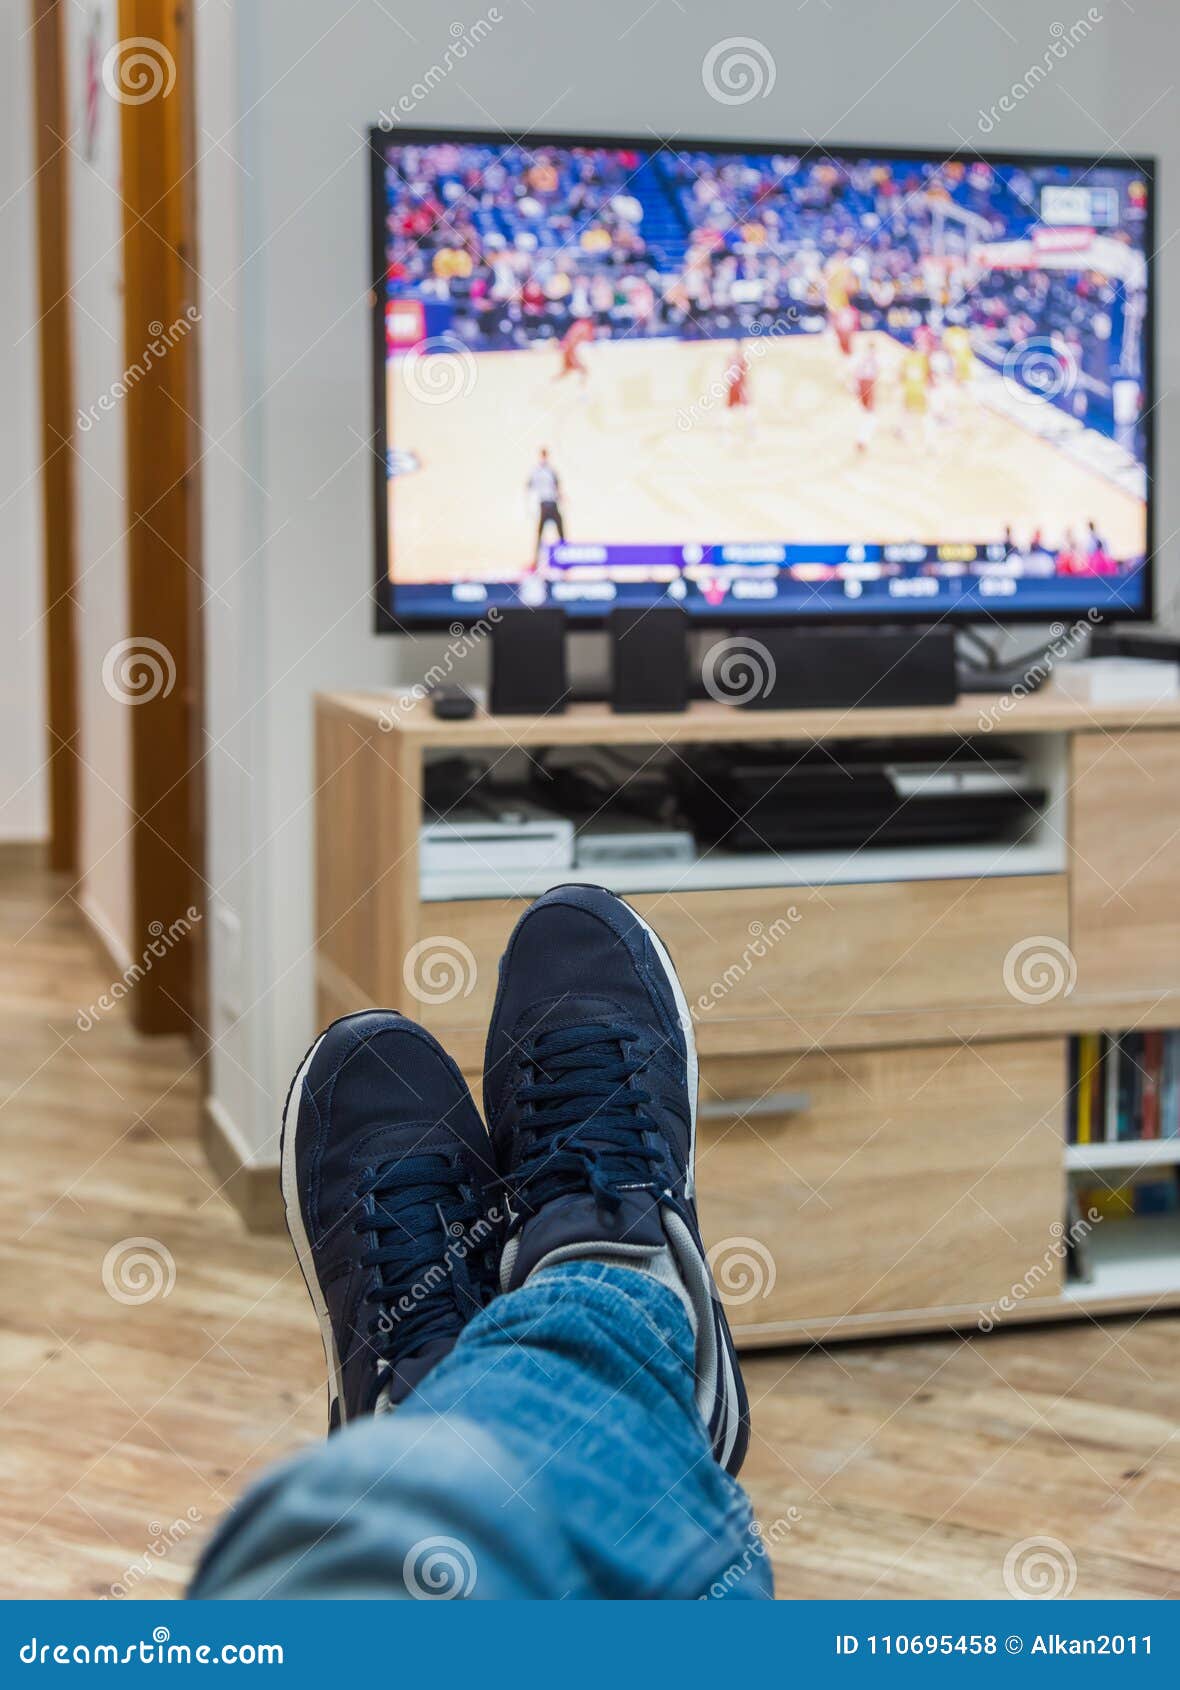 Man Watching a Basketball Game on Tv Stock Photo